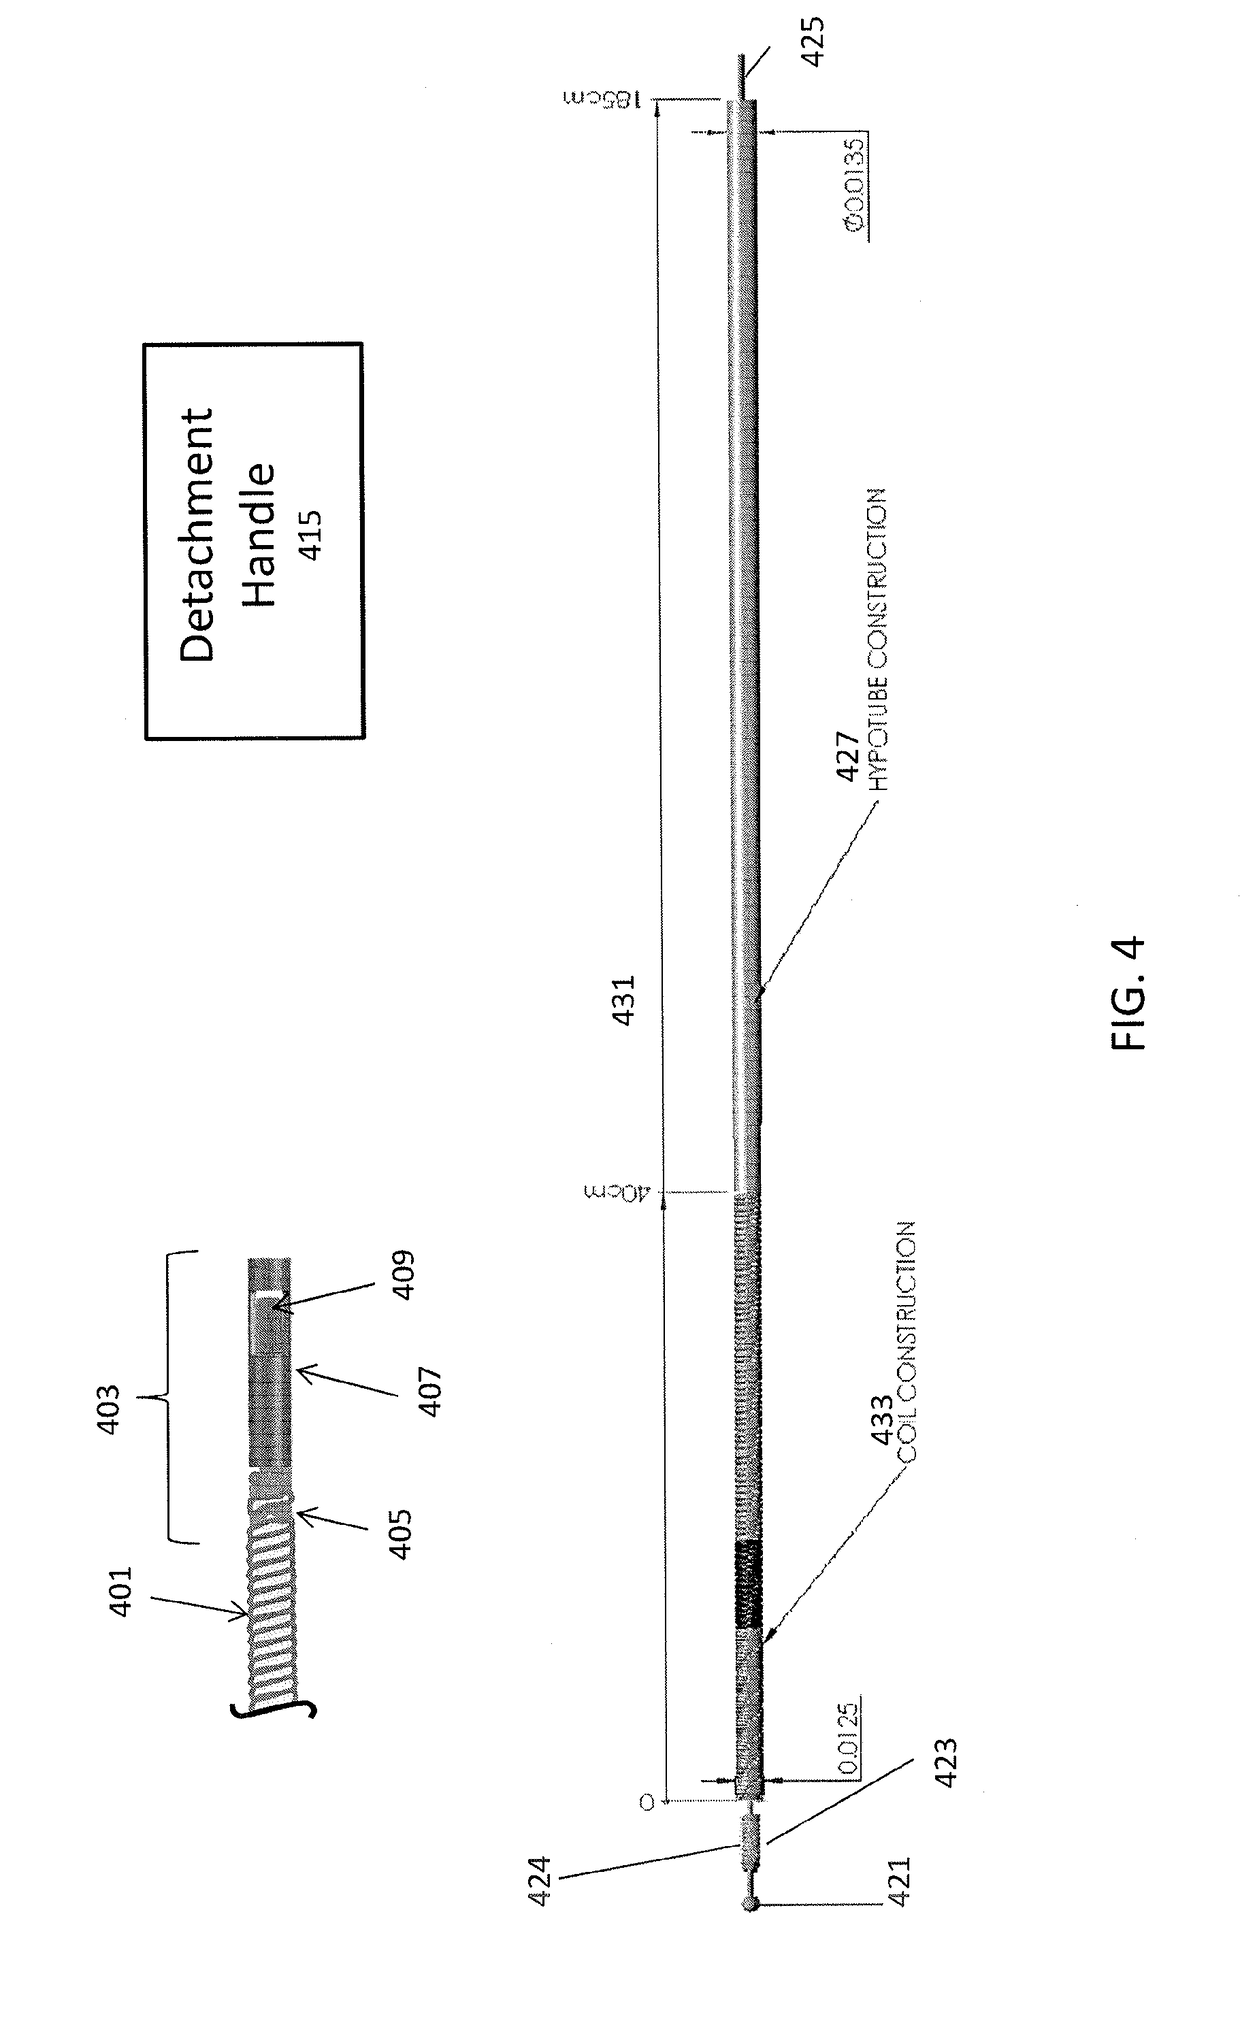 Mechanical embolization delivery apparatus and methods